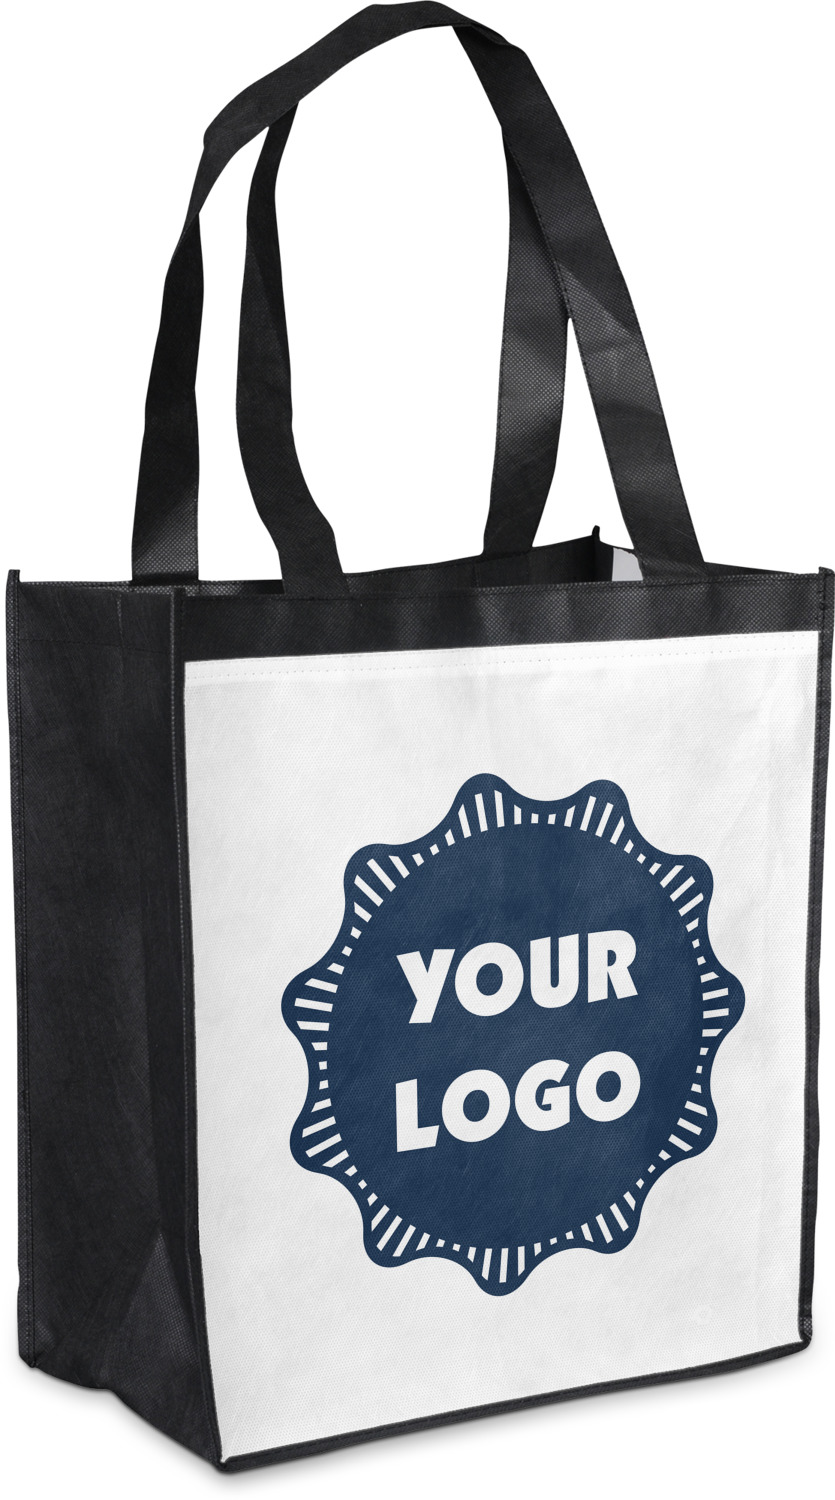 Sublimation Canvas Tote Bag 10 x 14 inches, customizable